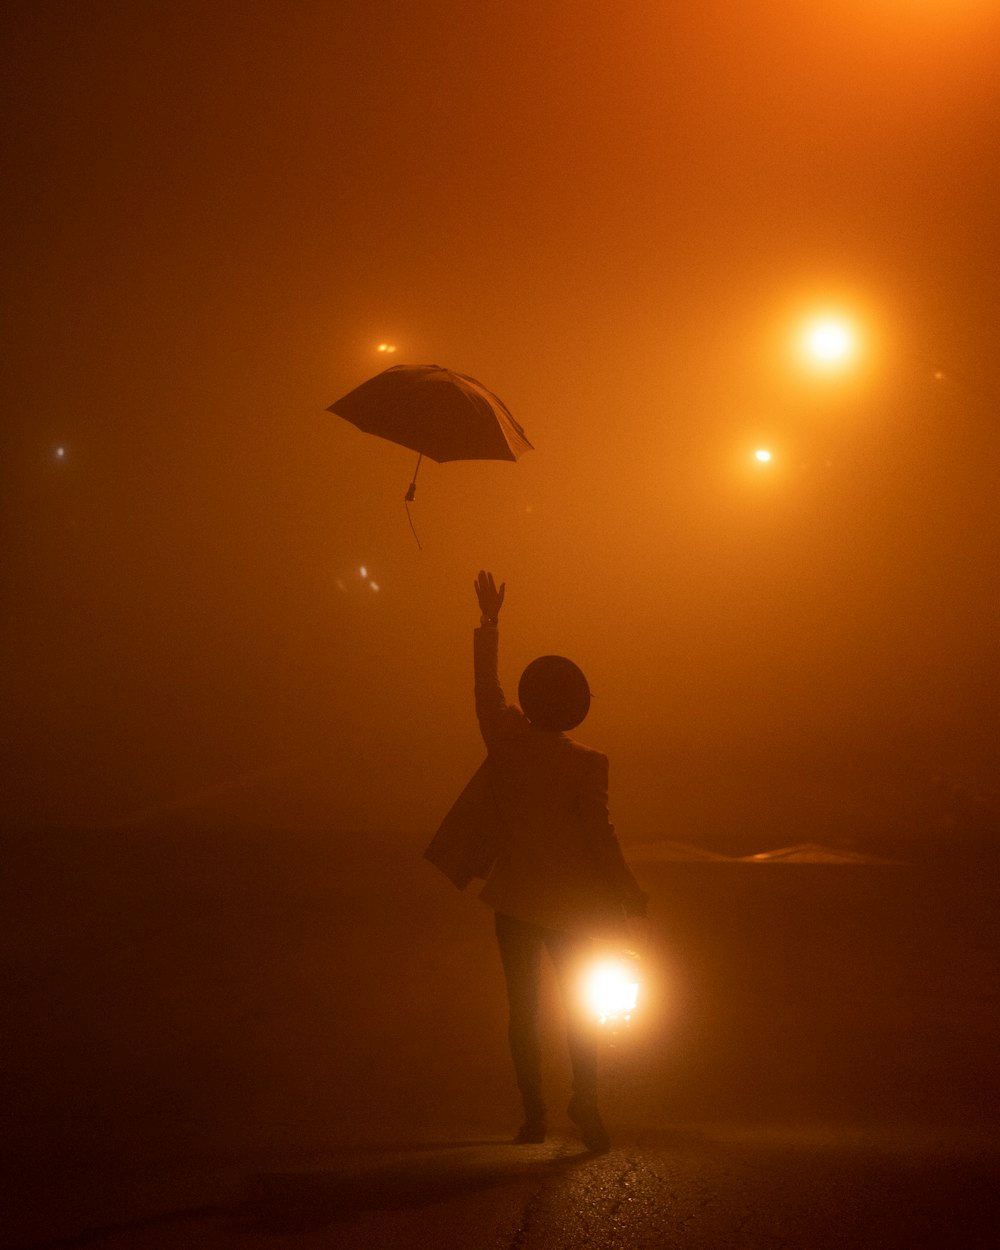 a person is flying a kite in the fog